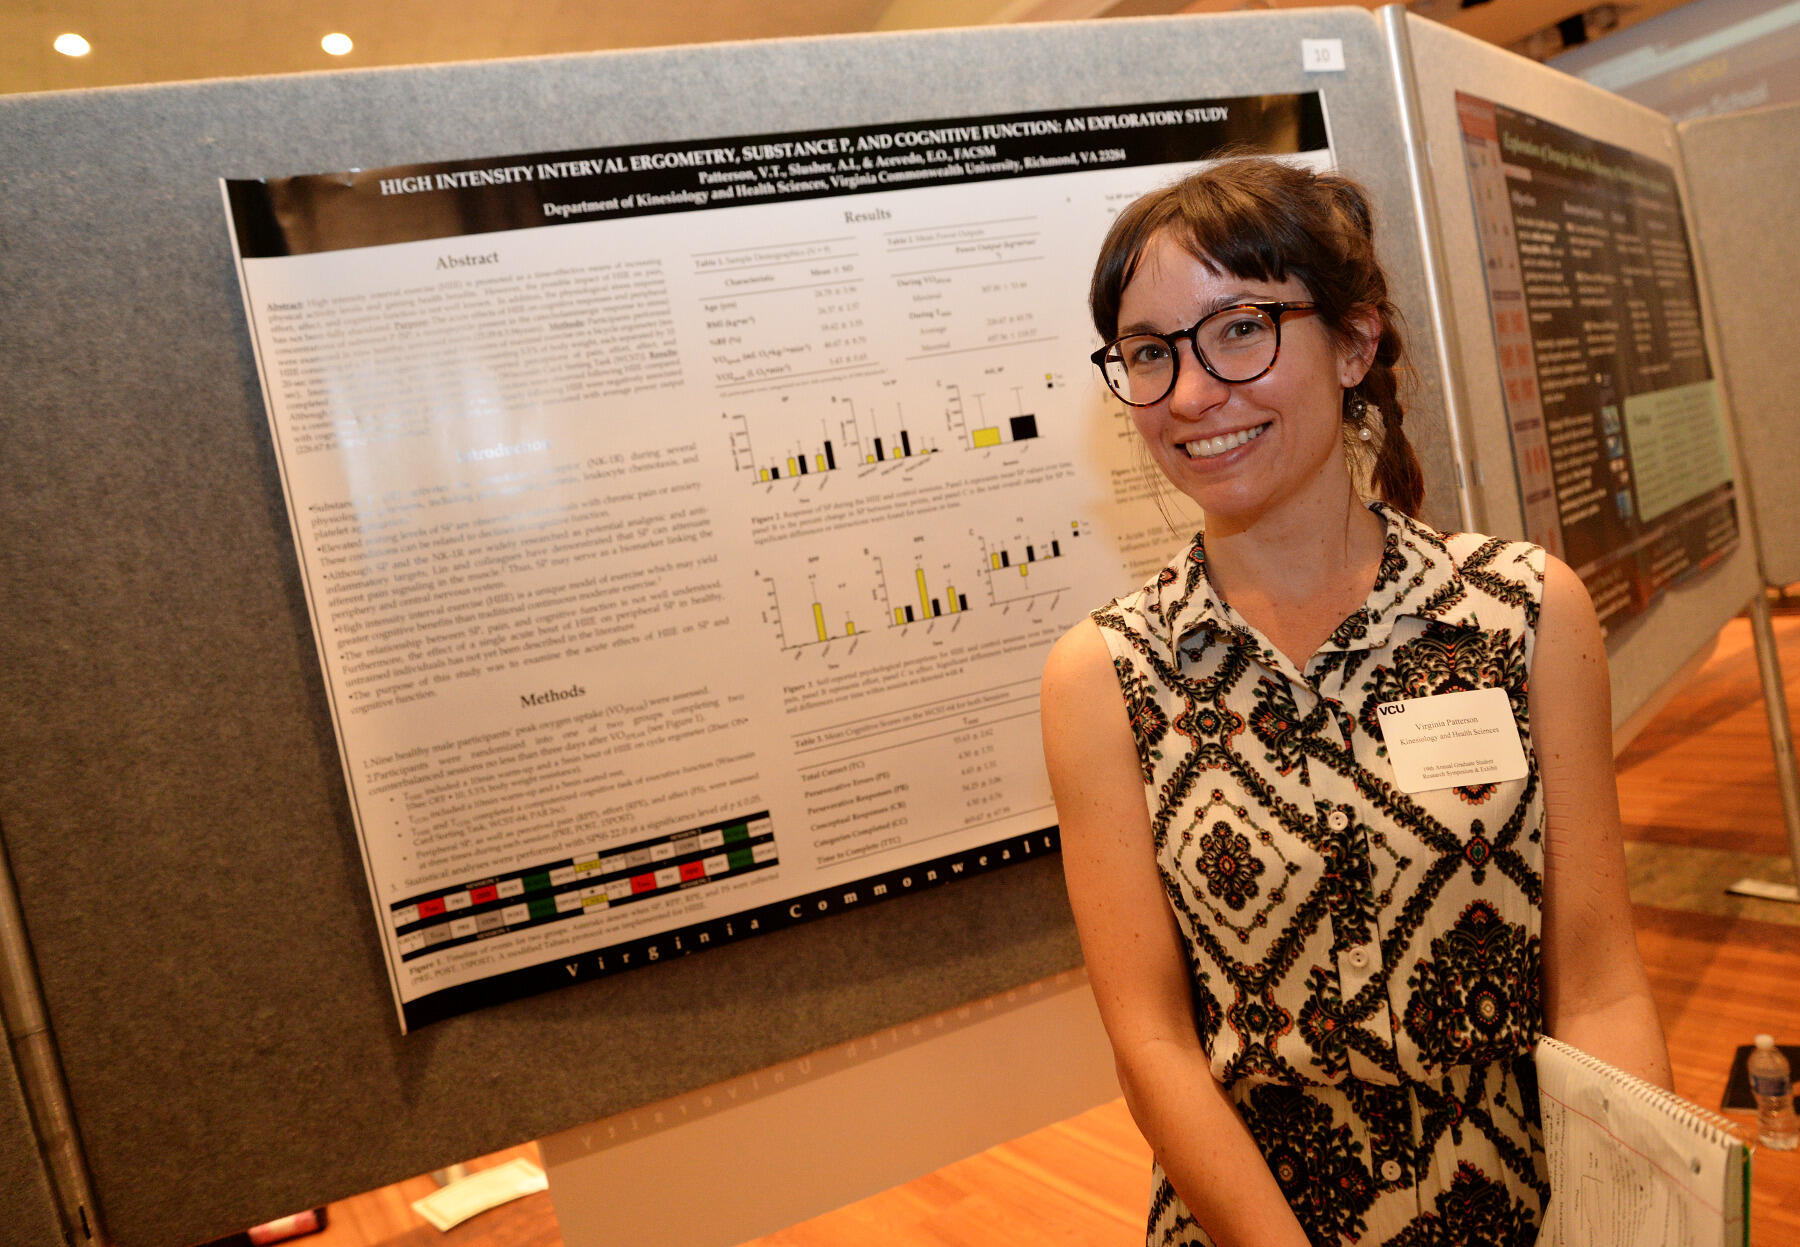 Virginia Patterson, a Kinesiology and Health Sciences student, presents her poster Tuesday, April 19 during the 19th Annual Graduate Research Symposium and Exhibit at the University Student Commons.